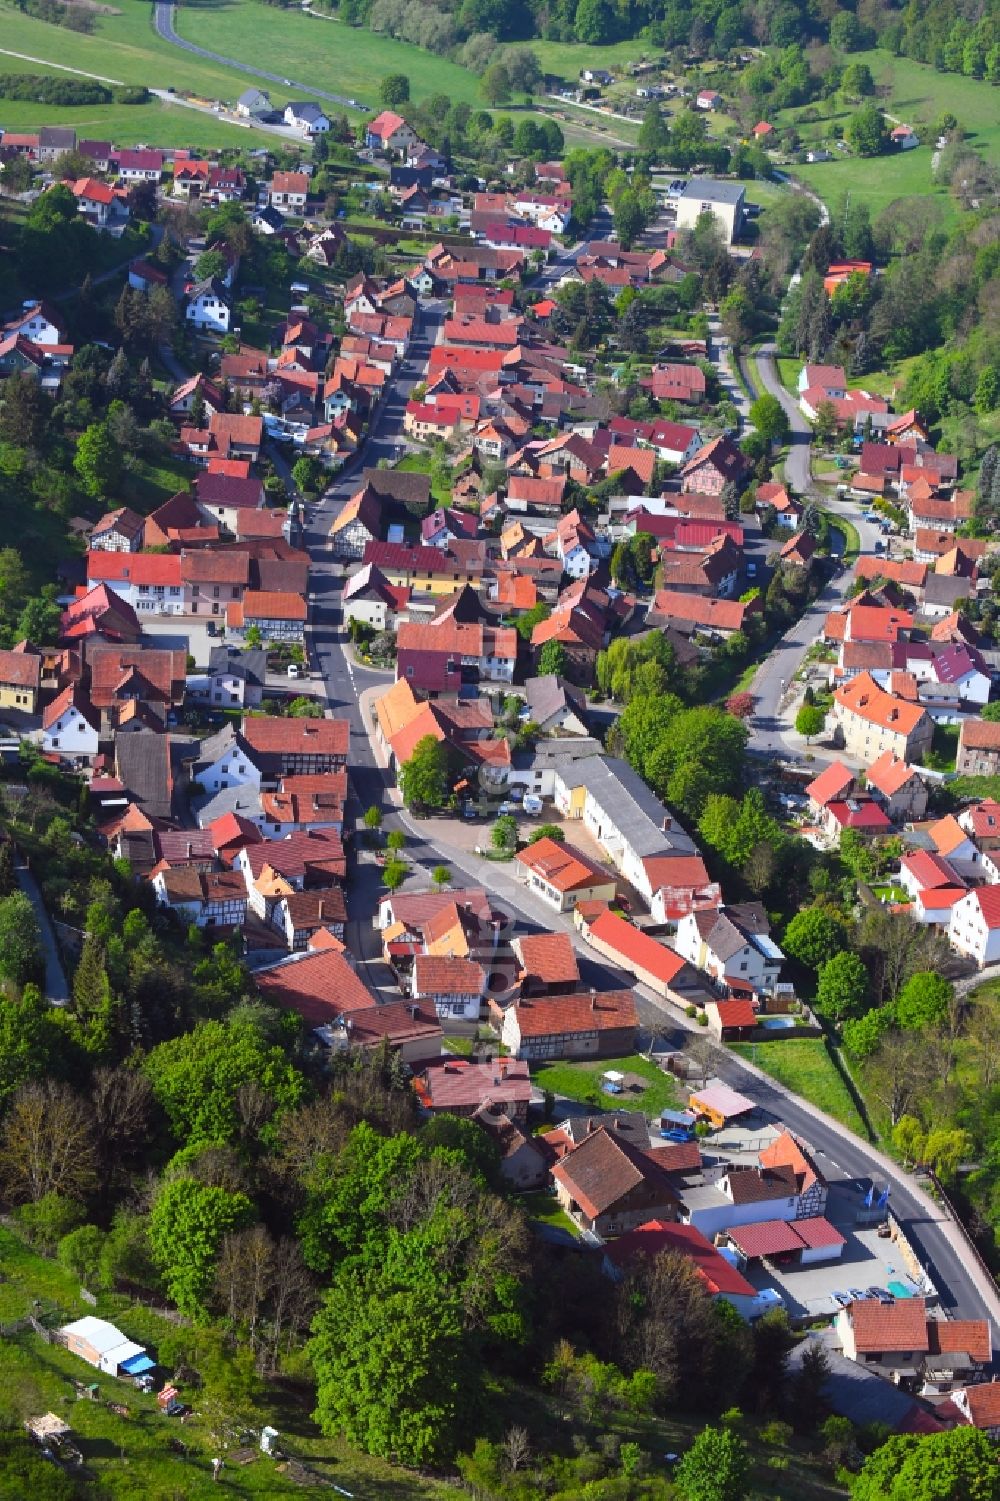 Aerial photograph Nazza - Location view of the streets and houses of residential areas in the valley landscape surrounded by mountains in Nazza in the state Thuringia, Germany